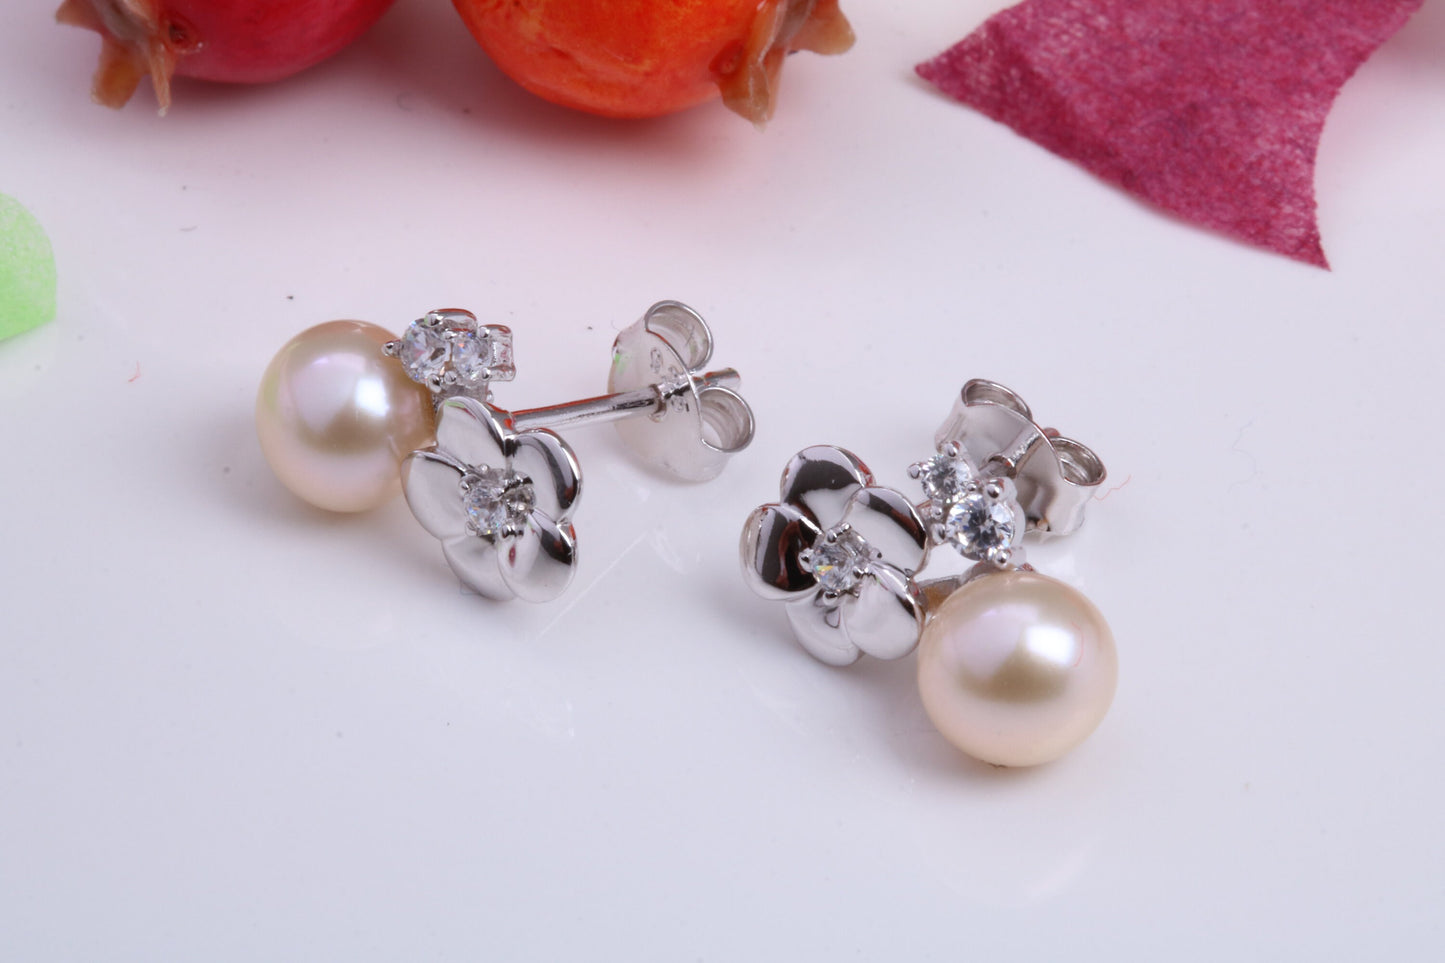 Rose Flower Pearl and Cubic Zirconia set Stud Earrings, Very Dressy, Made from Solid 925 Grade Sterling Silver